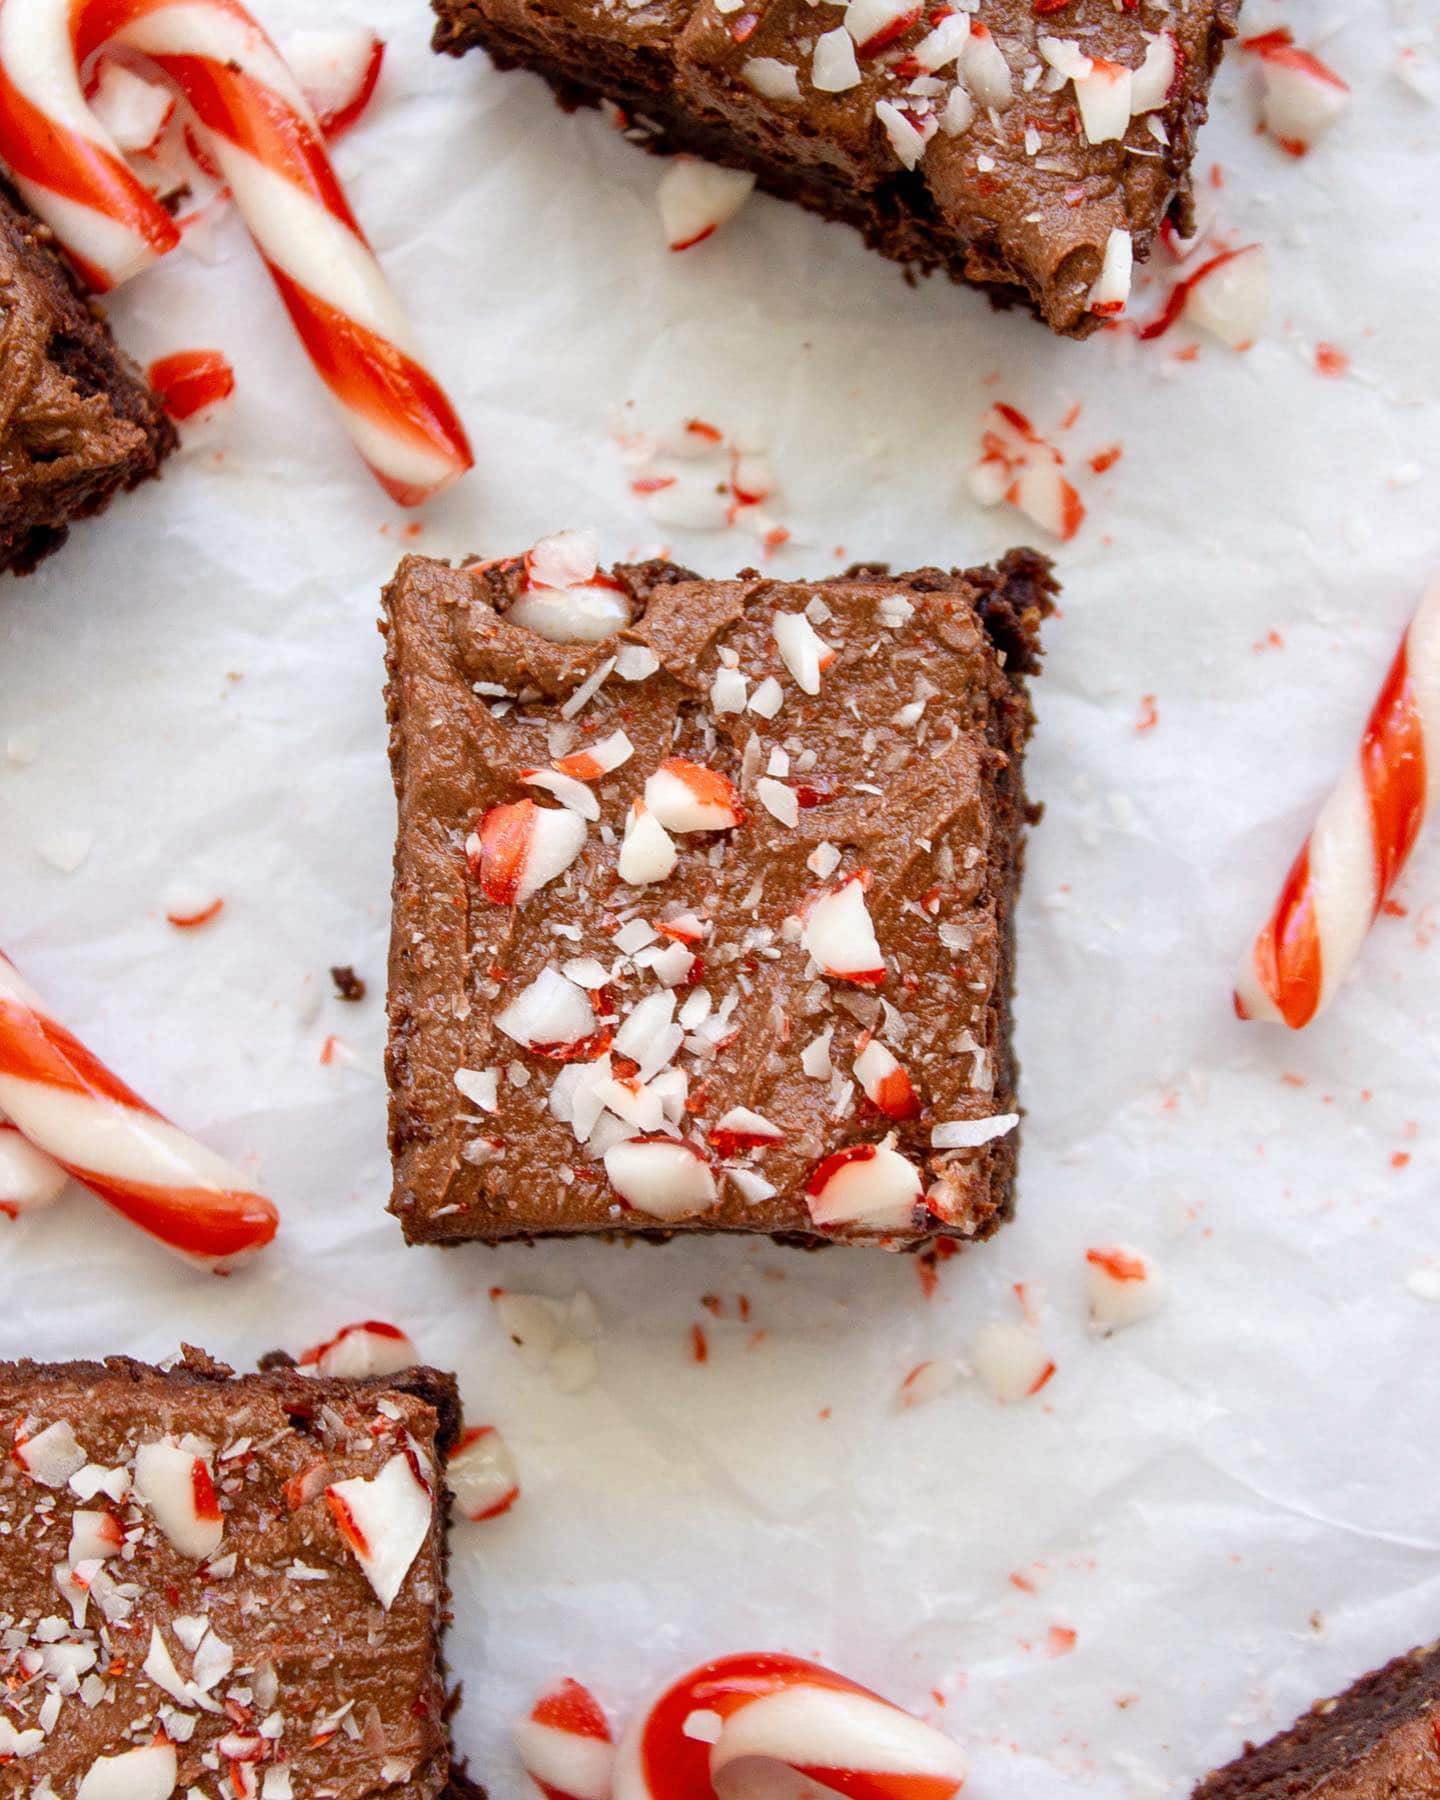 Have you started Christmas baking yet? ♥️🎄🎅

I’m feeling like today is the day in my house - and these iced Chocolate Peppermint Brownies are as Christmassy as jingle bells.

The actual brownie is lower in added sugar than a traditional brownie as I use banana as a sweetener to reduce some of the sugar…but the fact the brownie is slathered with a delicious buttercream and sprinkled with crushed candy canes sort of reduces the health factor. Oops. Oh well. ‘Tis the season right?!

Keen to get your bake on? Drop me a ❤️ or 🤍 or your favourite emojis and I’ll get the recipe to you…or grab direct on the blog link in profile @goodiegoodielunchbox or goodiegoodielunchbox.com.au search “peppermint”

Bernadette x